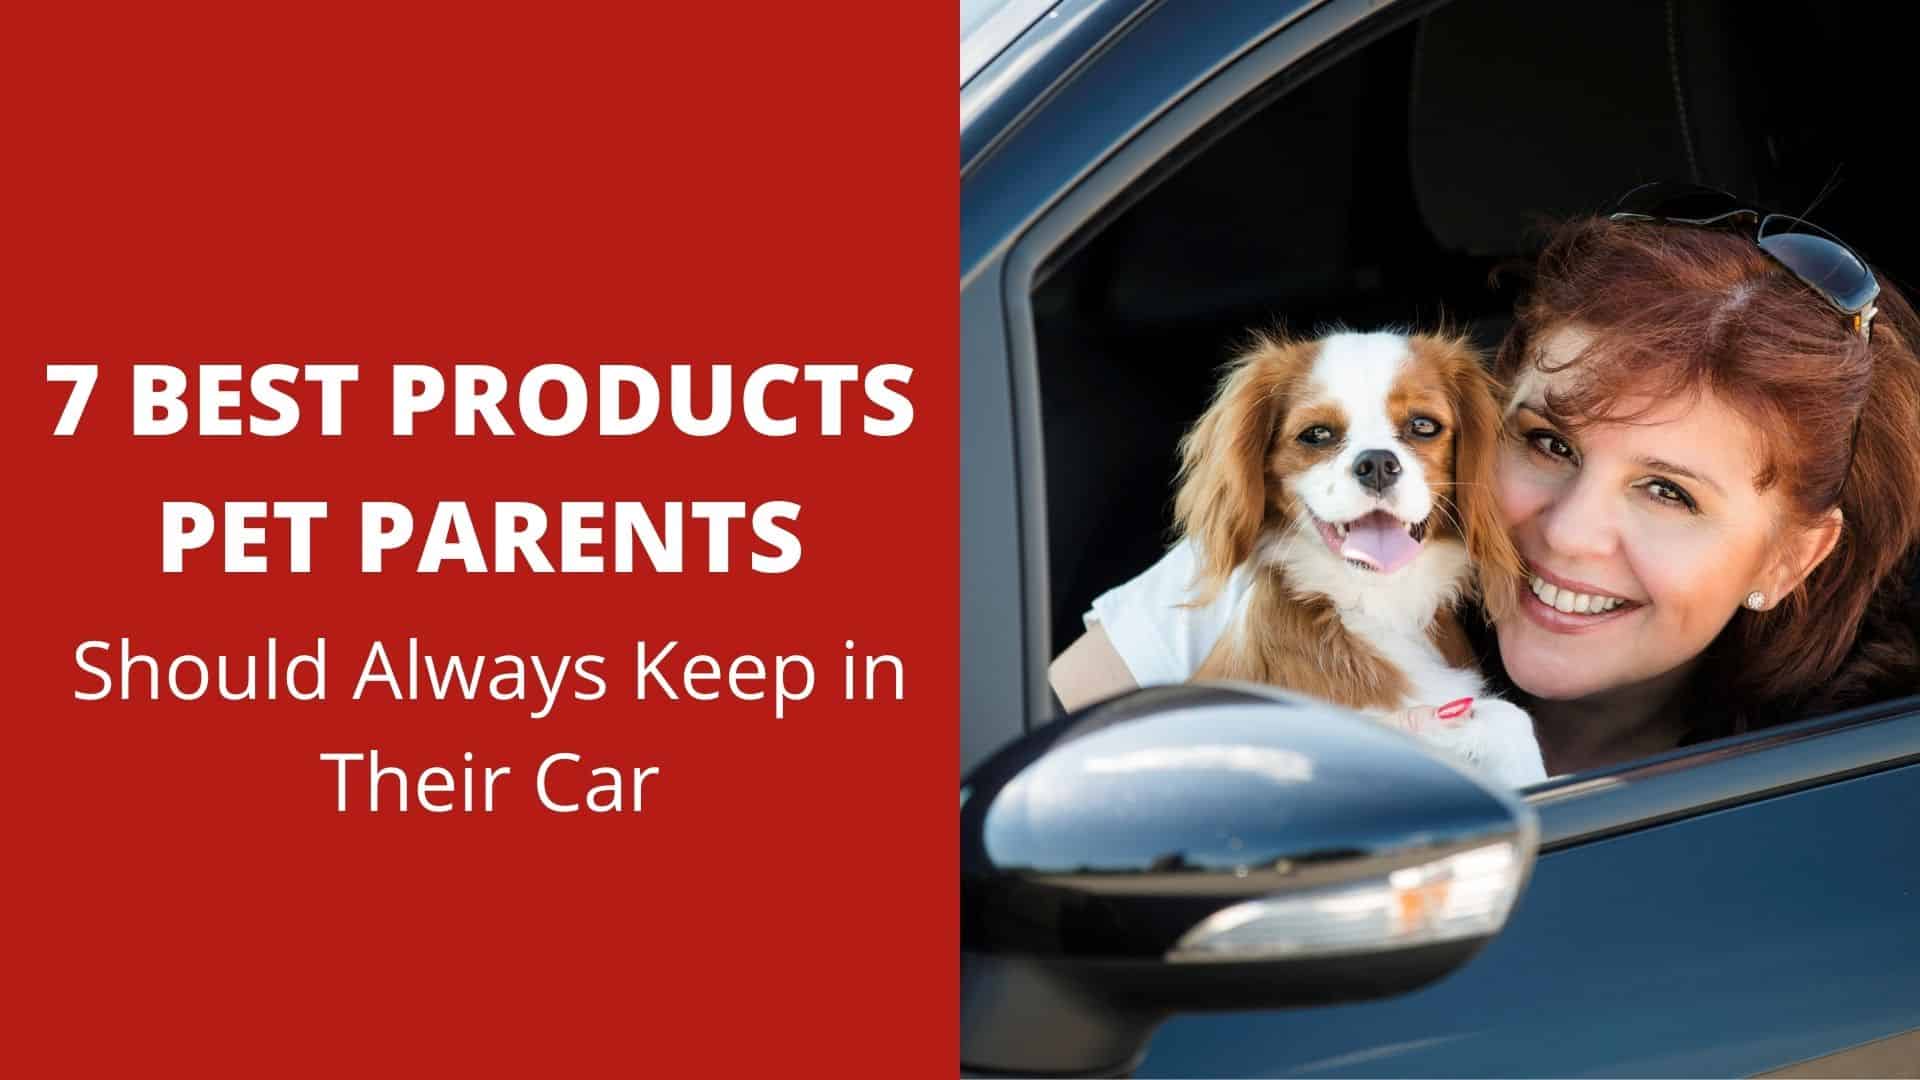 7 Best Products Pet Parents Should Always Keep in Their Car